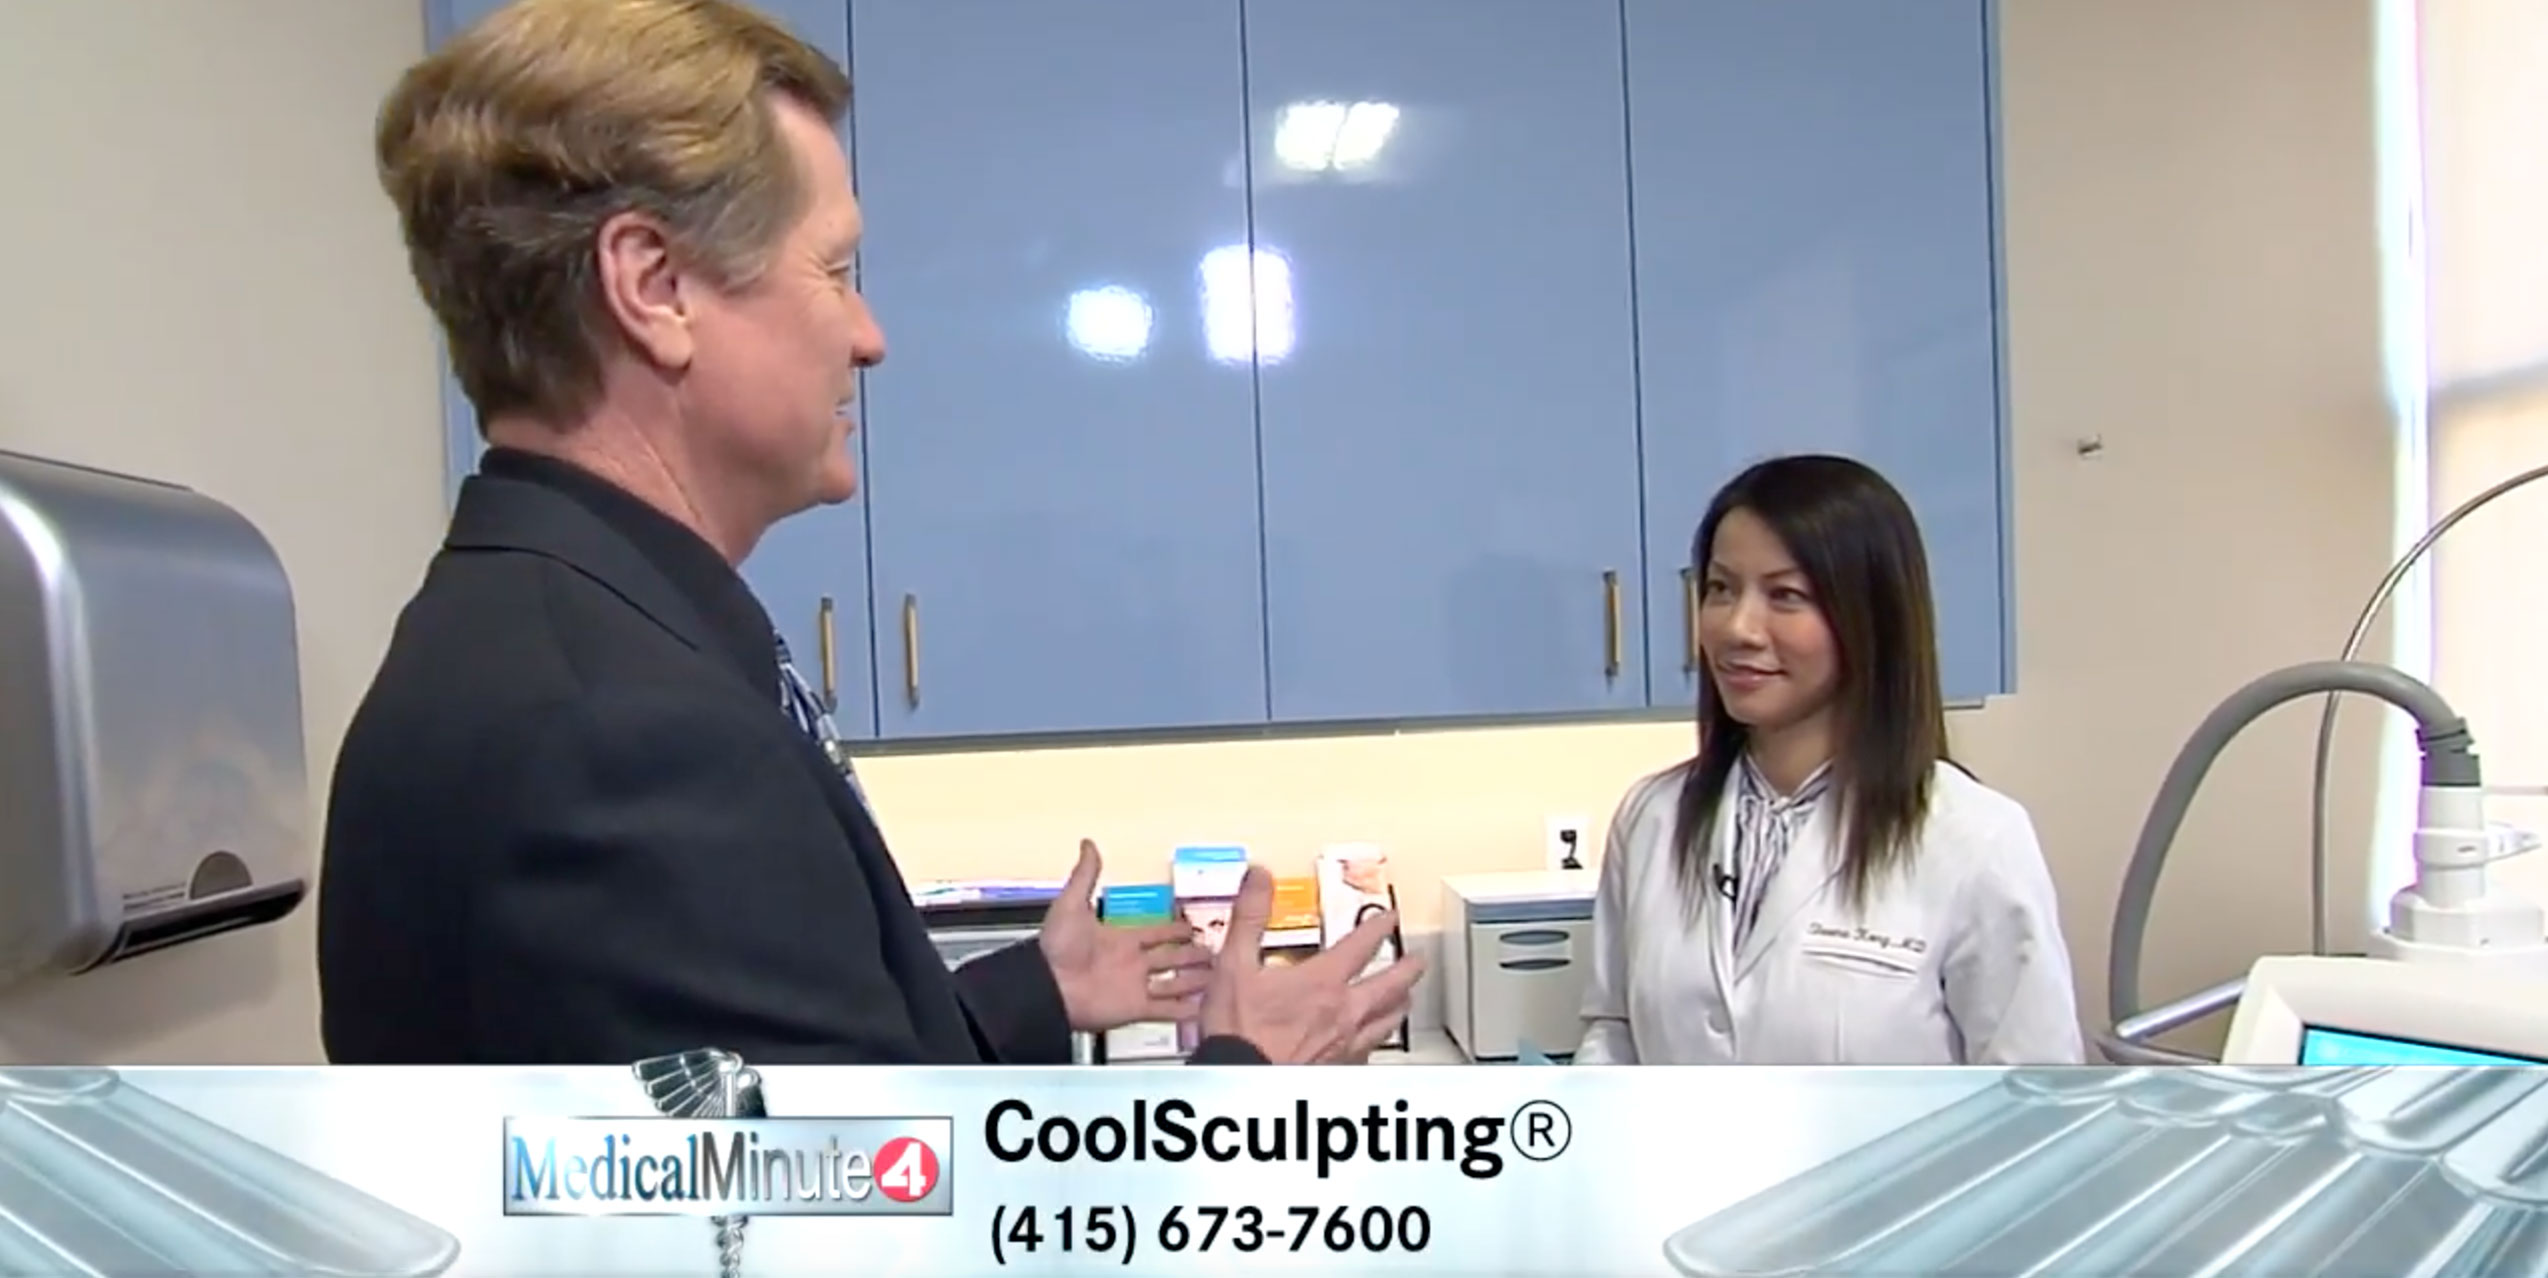 Dr. Kong talking about Coolsculpting